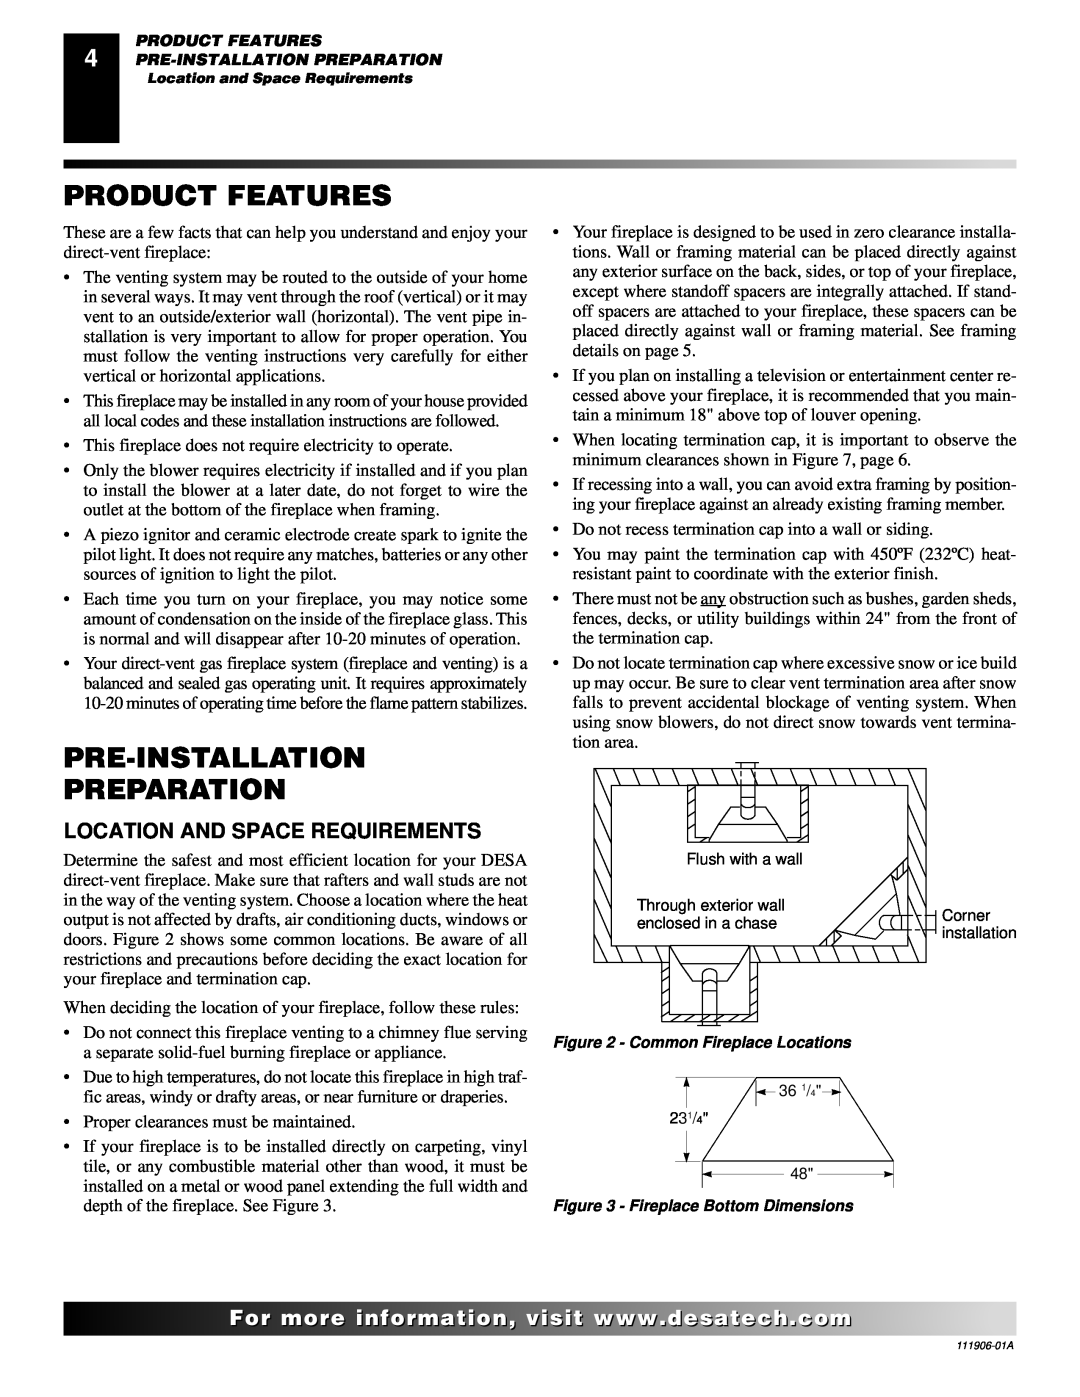 Desa (V)V42NA(1) installation manual Product Features, Pre-Installation Preparation, Location And Space Requirements 